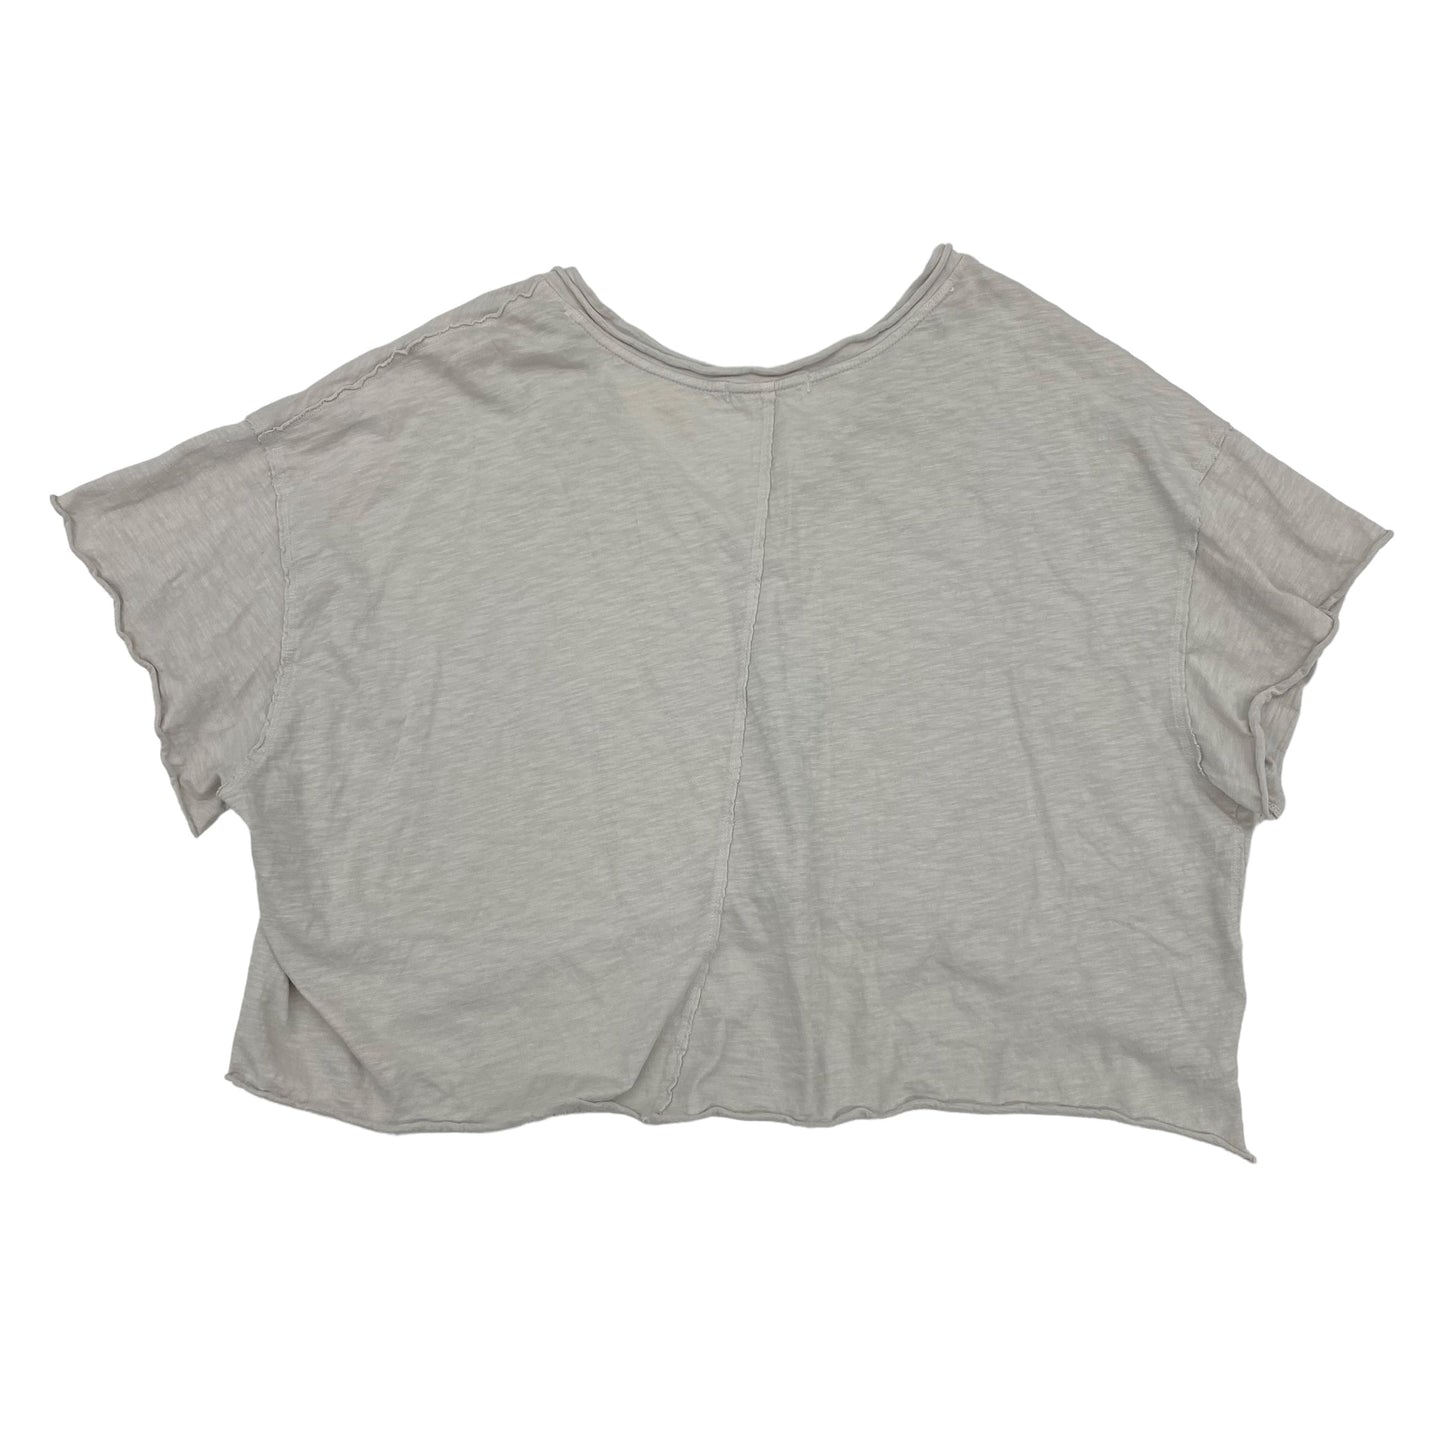 GREY FREE PEOPLE TOP SS, Size L